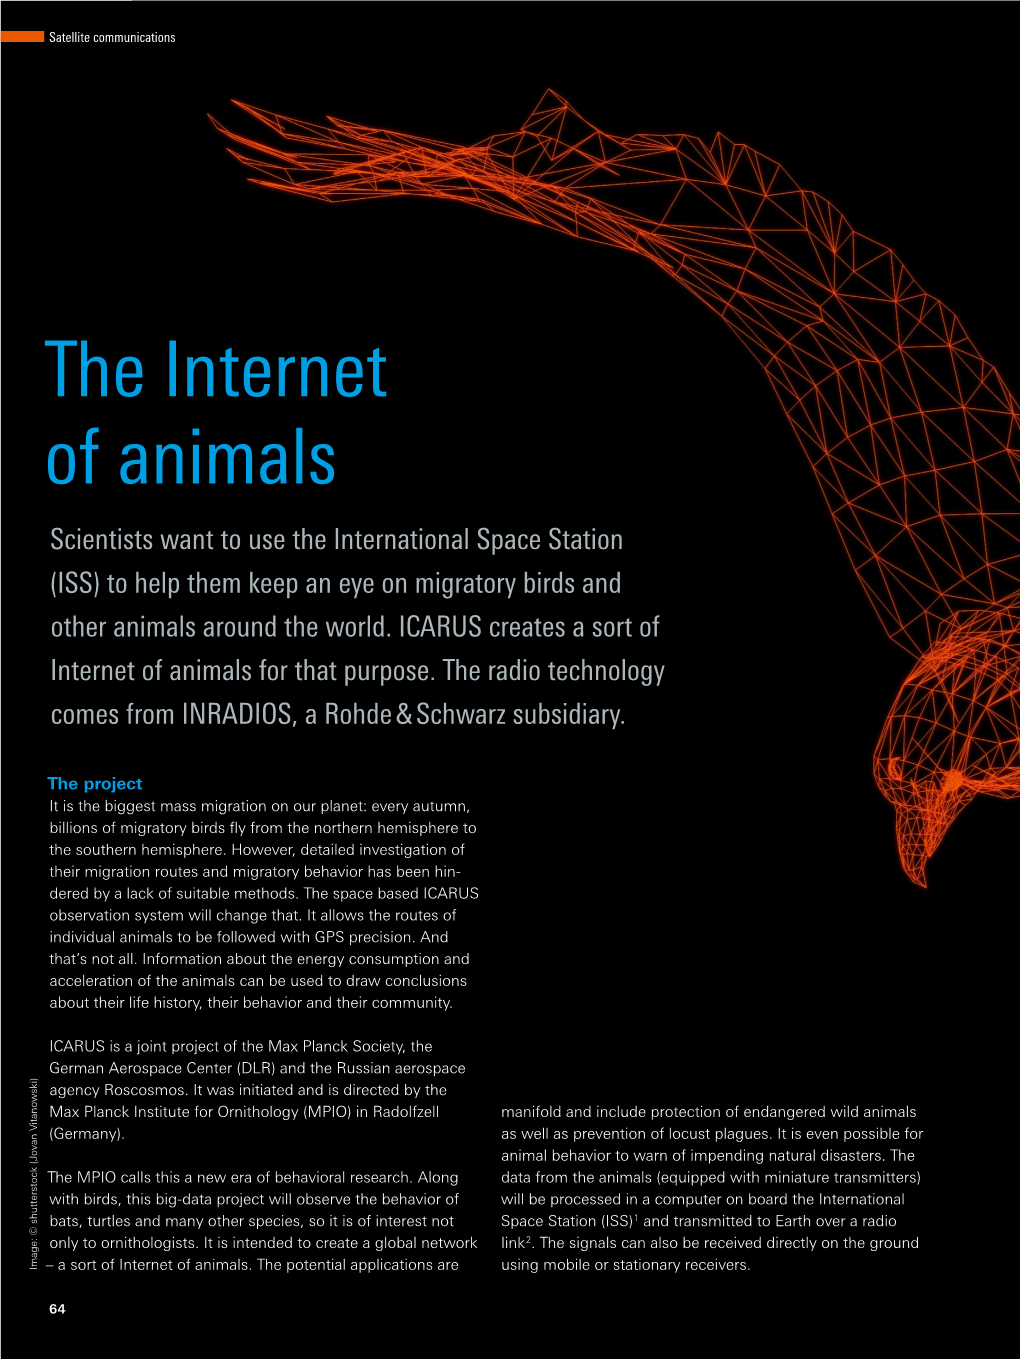 The Internet of Animals Scientists Want to Use the International Space Station (ISS) to Help Them Keep an Eye on Migratory Birds and Other Animals Around the World